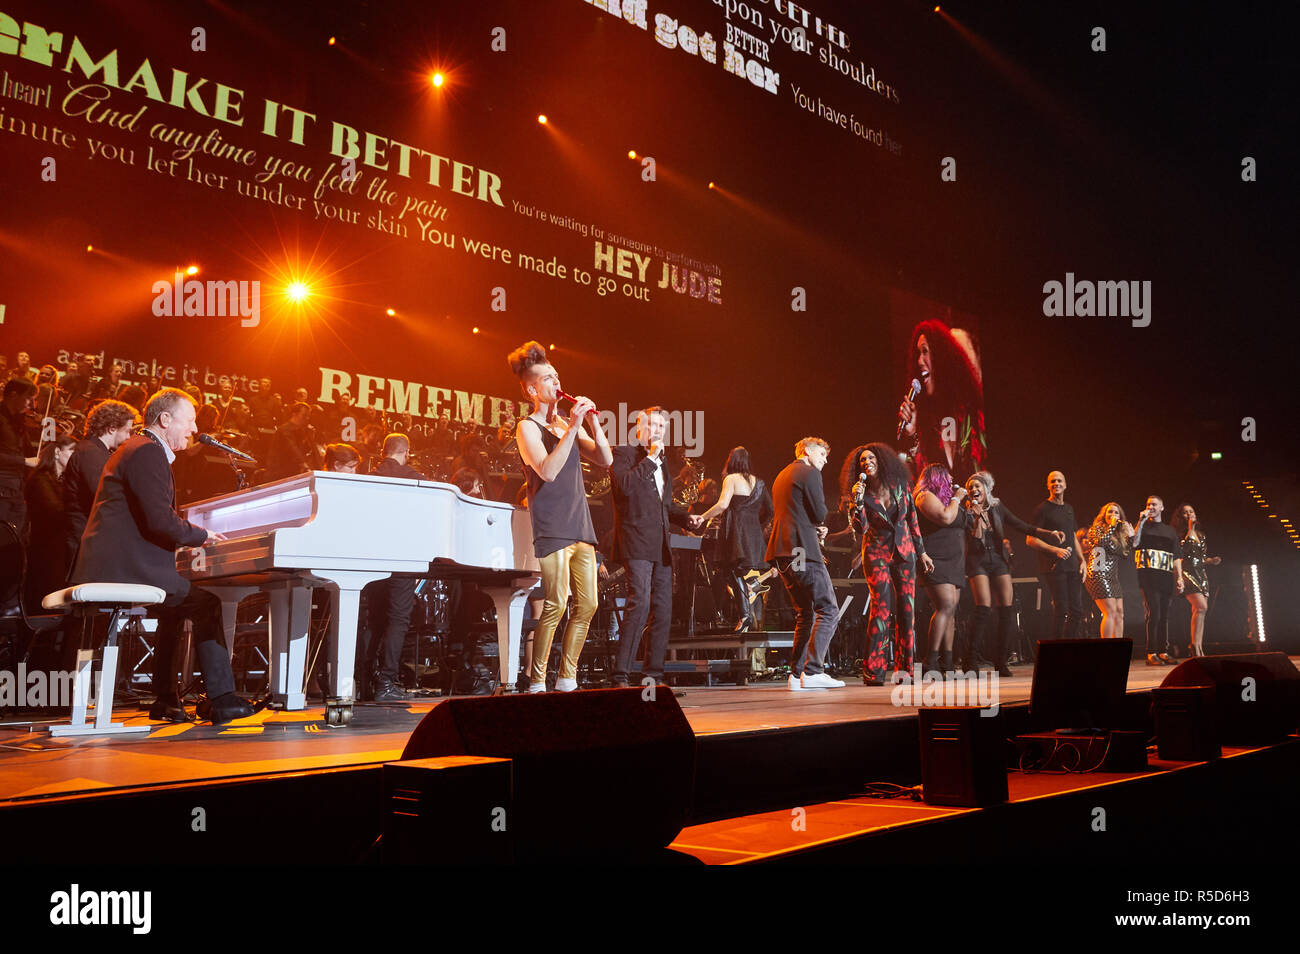 Hamburg, Germany. 30th Nov, 2018. John Miles (l-r), musicians from Great Britain, Gabor, music comedian, Bryan Ferry, singers from Great Britain, Tim Bendzko, Ruth, Anita and Sadako Pointer from the Pointer Sisters from the USA, Milow, singers from Belgium, and background singers are on stage at the tour kick-off of 'Night of the Proms' in the Barclaycard Arena. This year the Klassik-trifft-Pop format celebrates its 25th anniversary. Credit: Georg Wendt/dpa/Alamy Live News Stock Photo